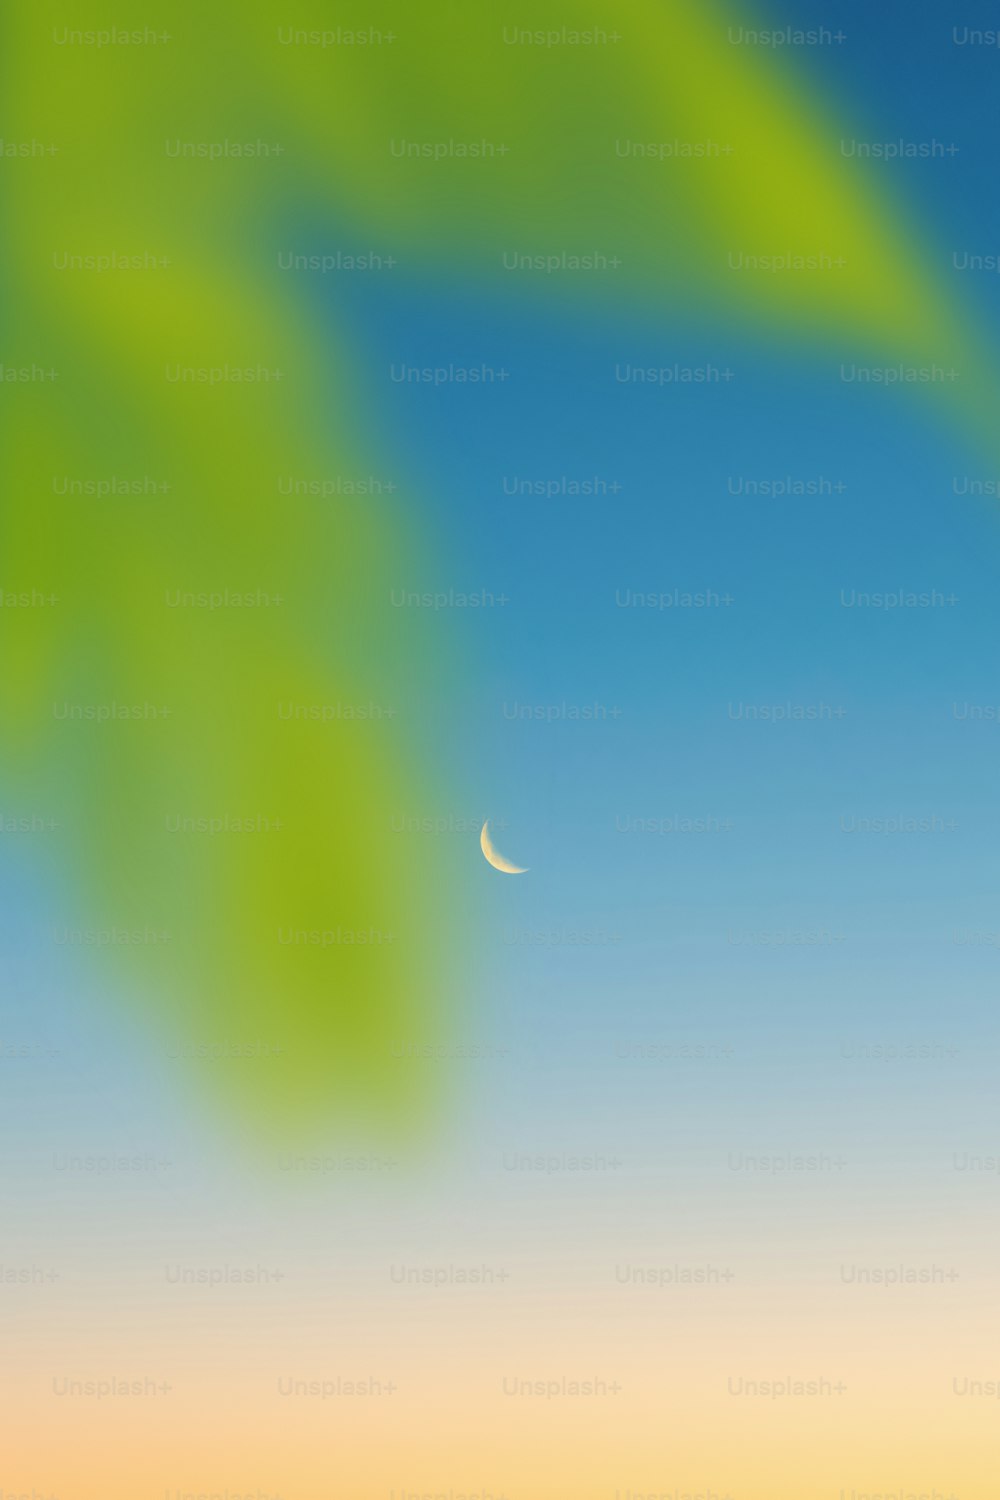 a blurry image of a green leaf and a half moon